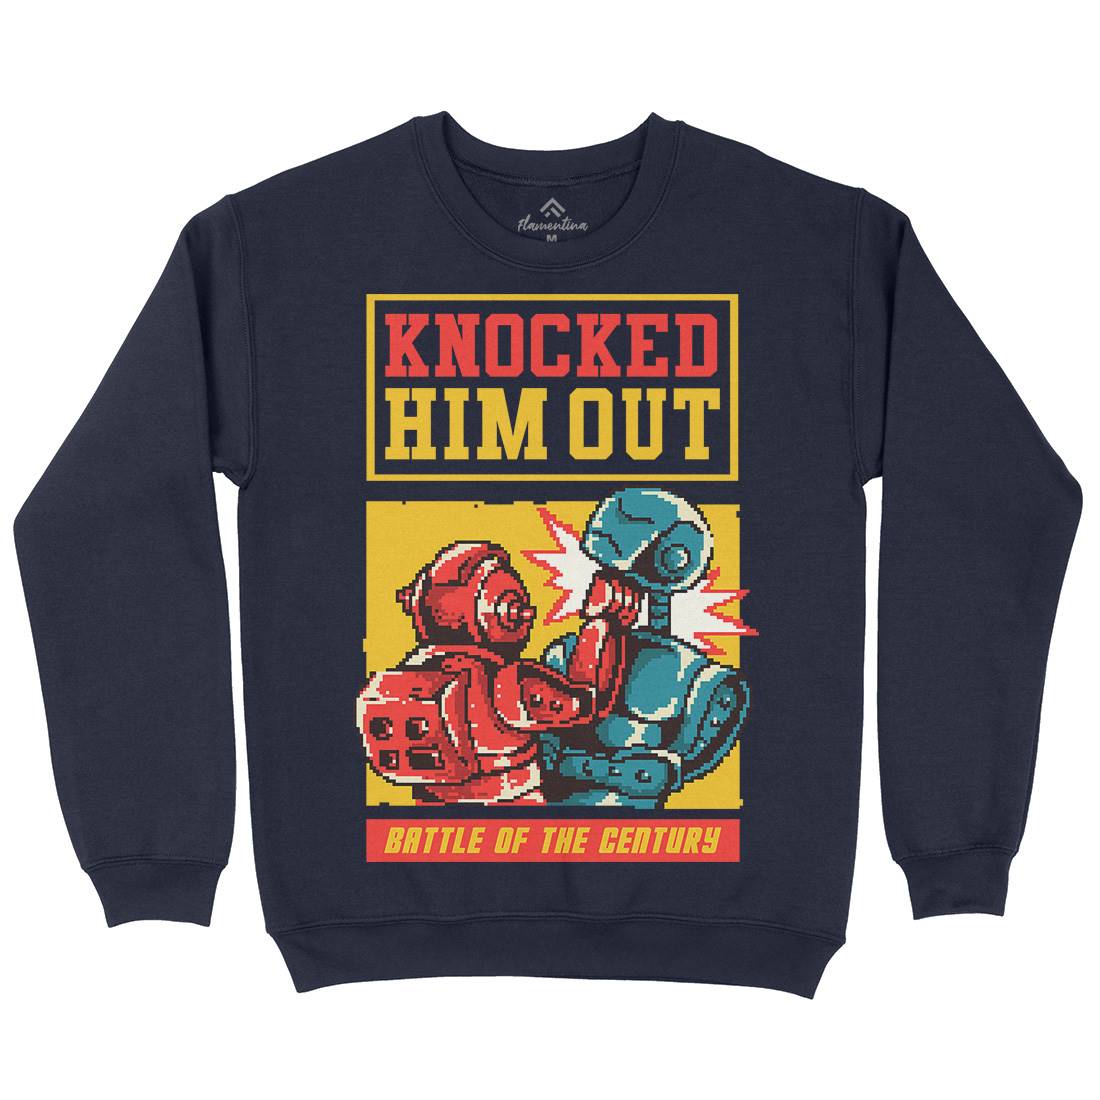 Knocked Him Out Mens Crew Neck Sweatshirt Space B923